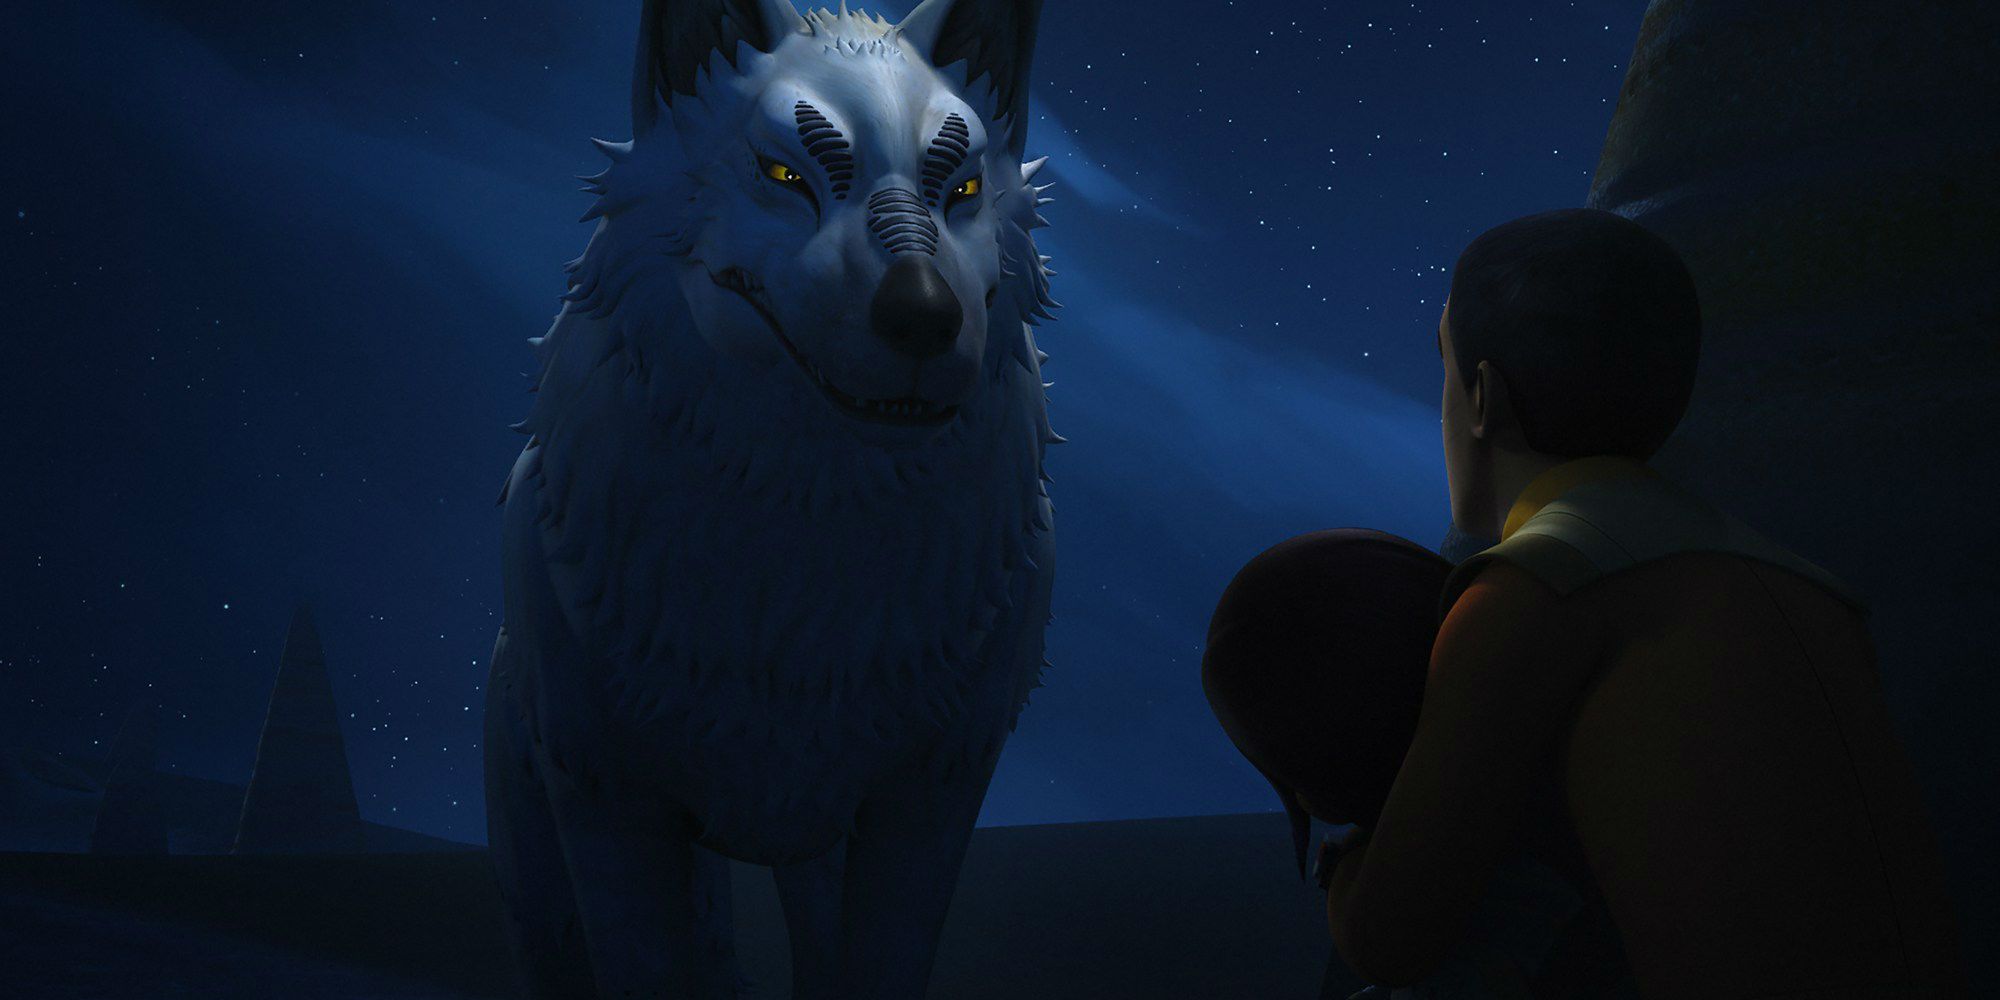 Star Wars Rebels Season 4 Loth Wolf named Dume approaches and guides Ezra